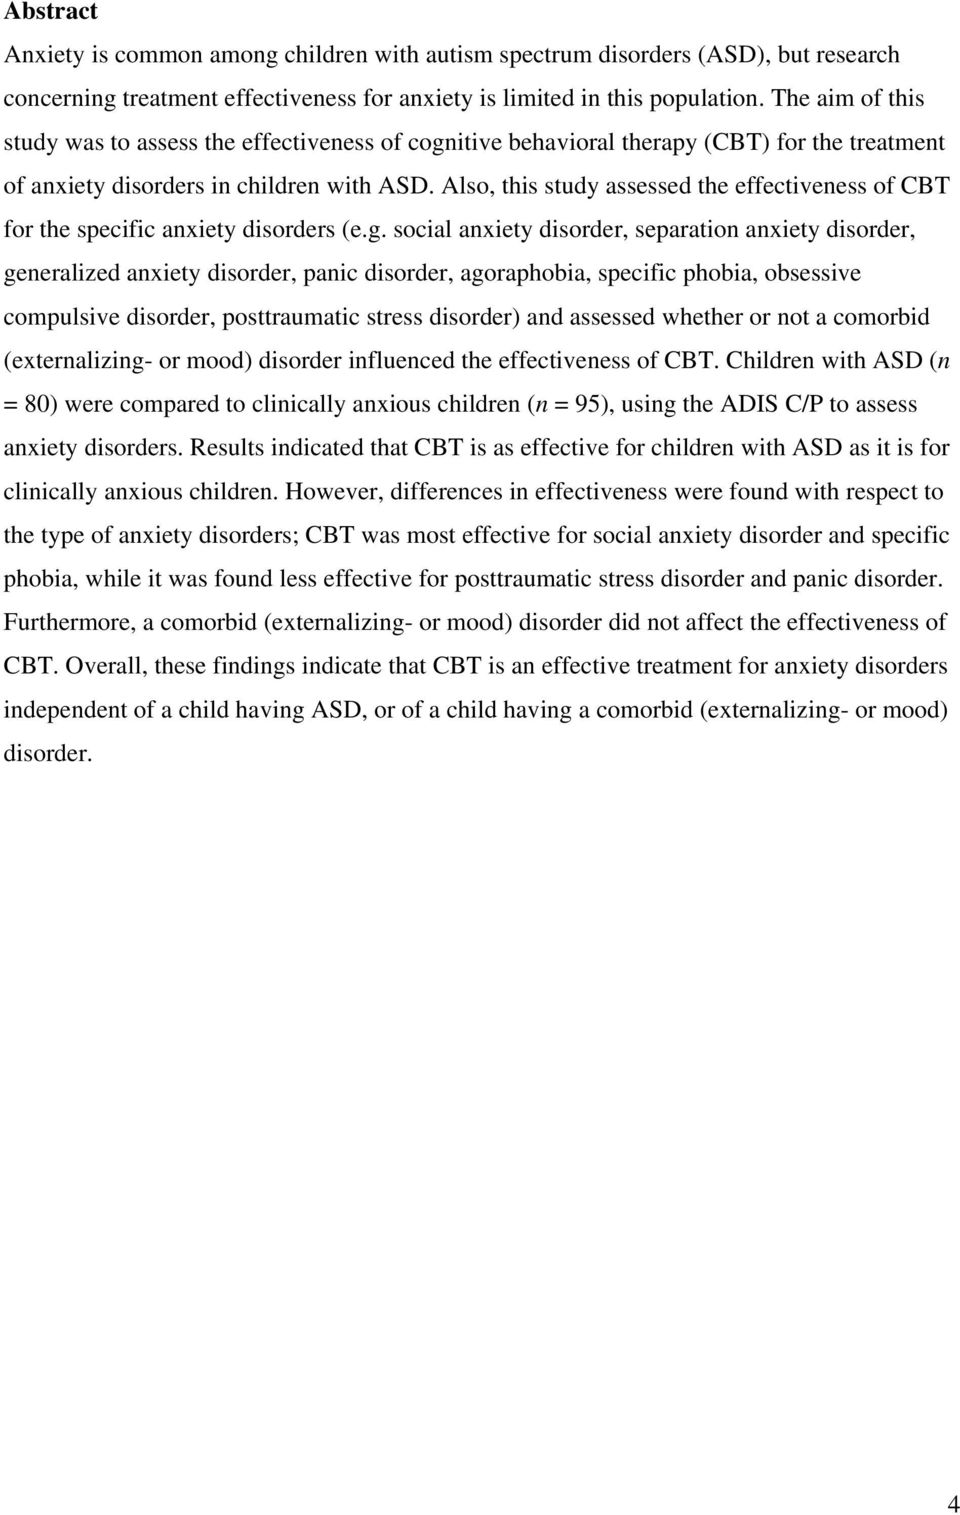 Also, this study assessed the effectiveness of CBT for the specific anxiety disorders (e.g.